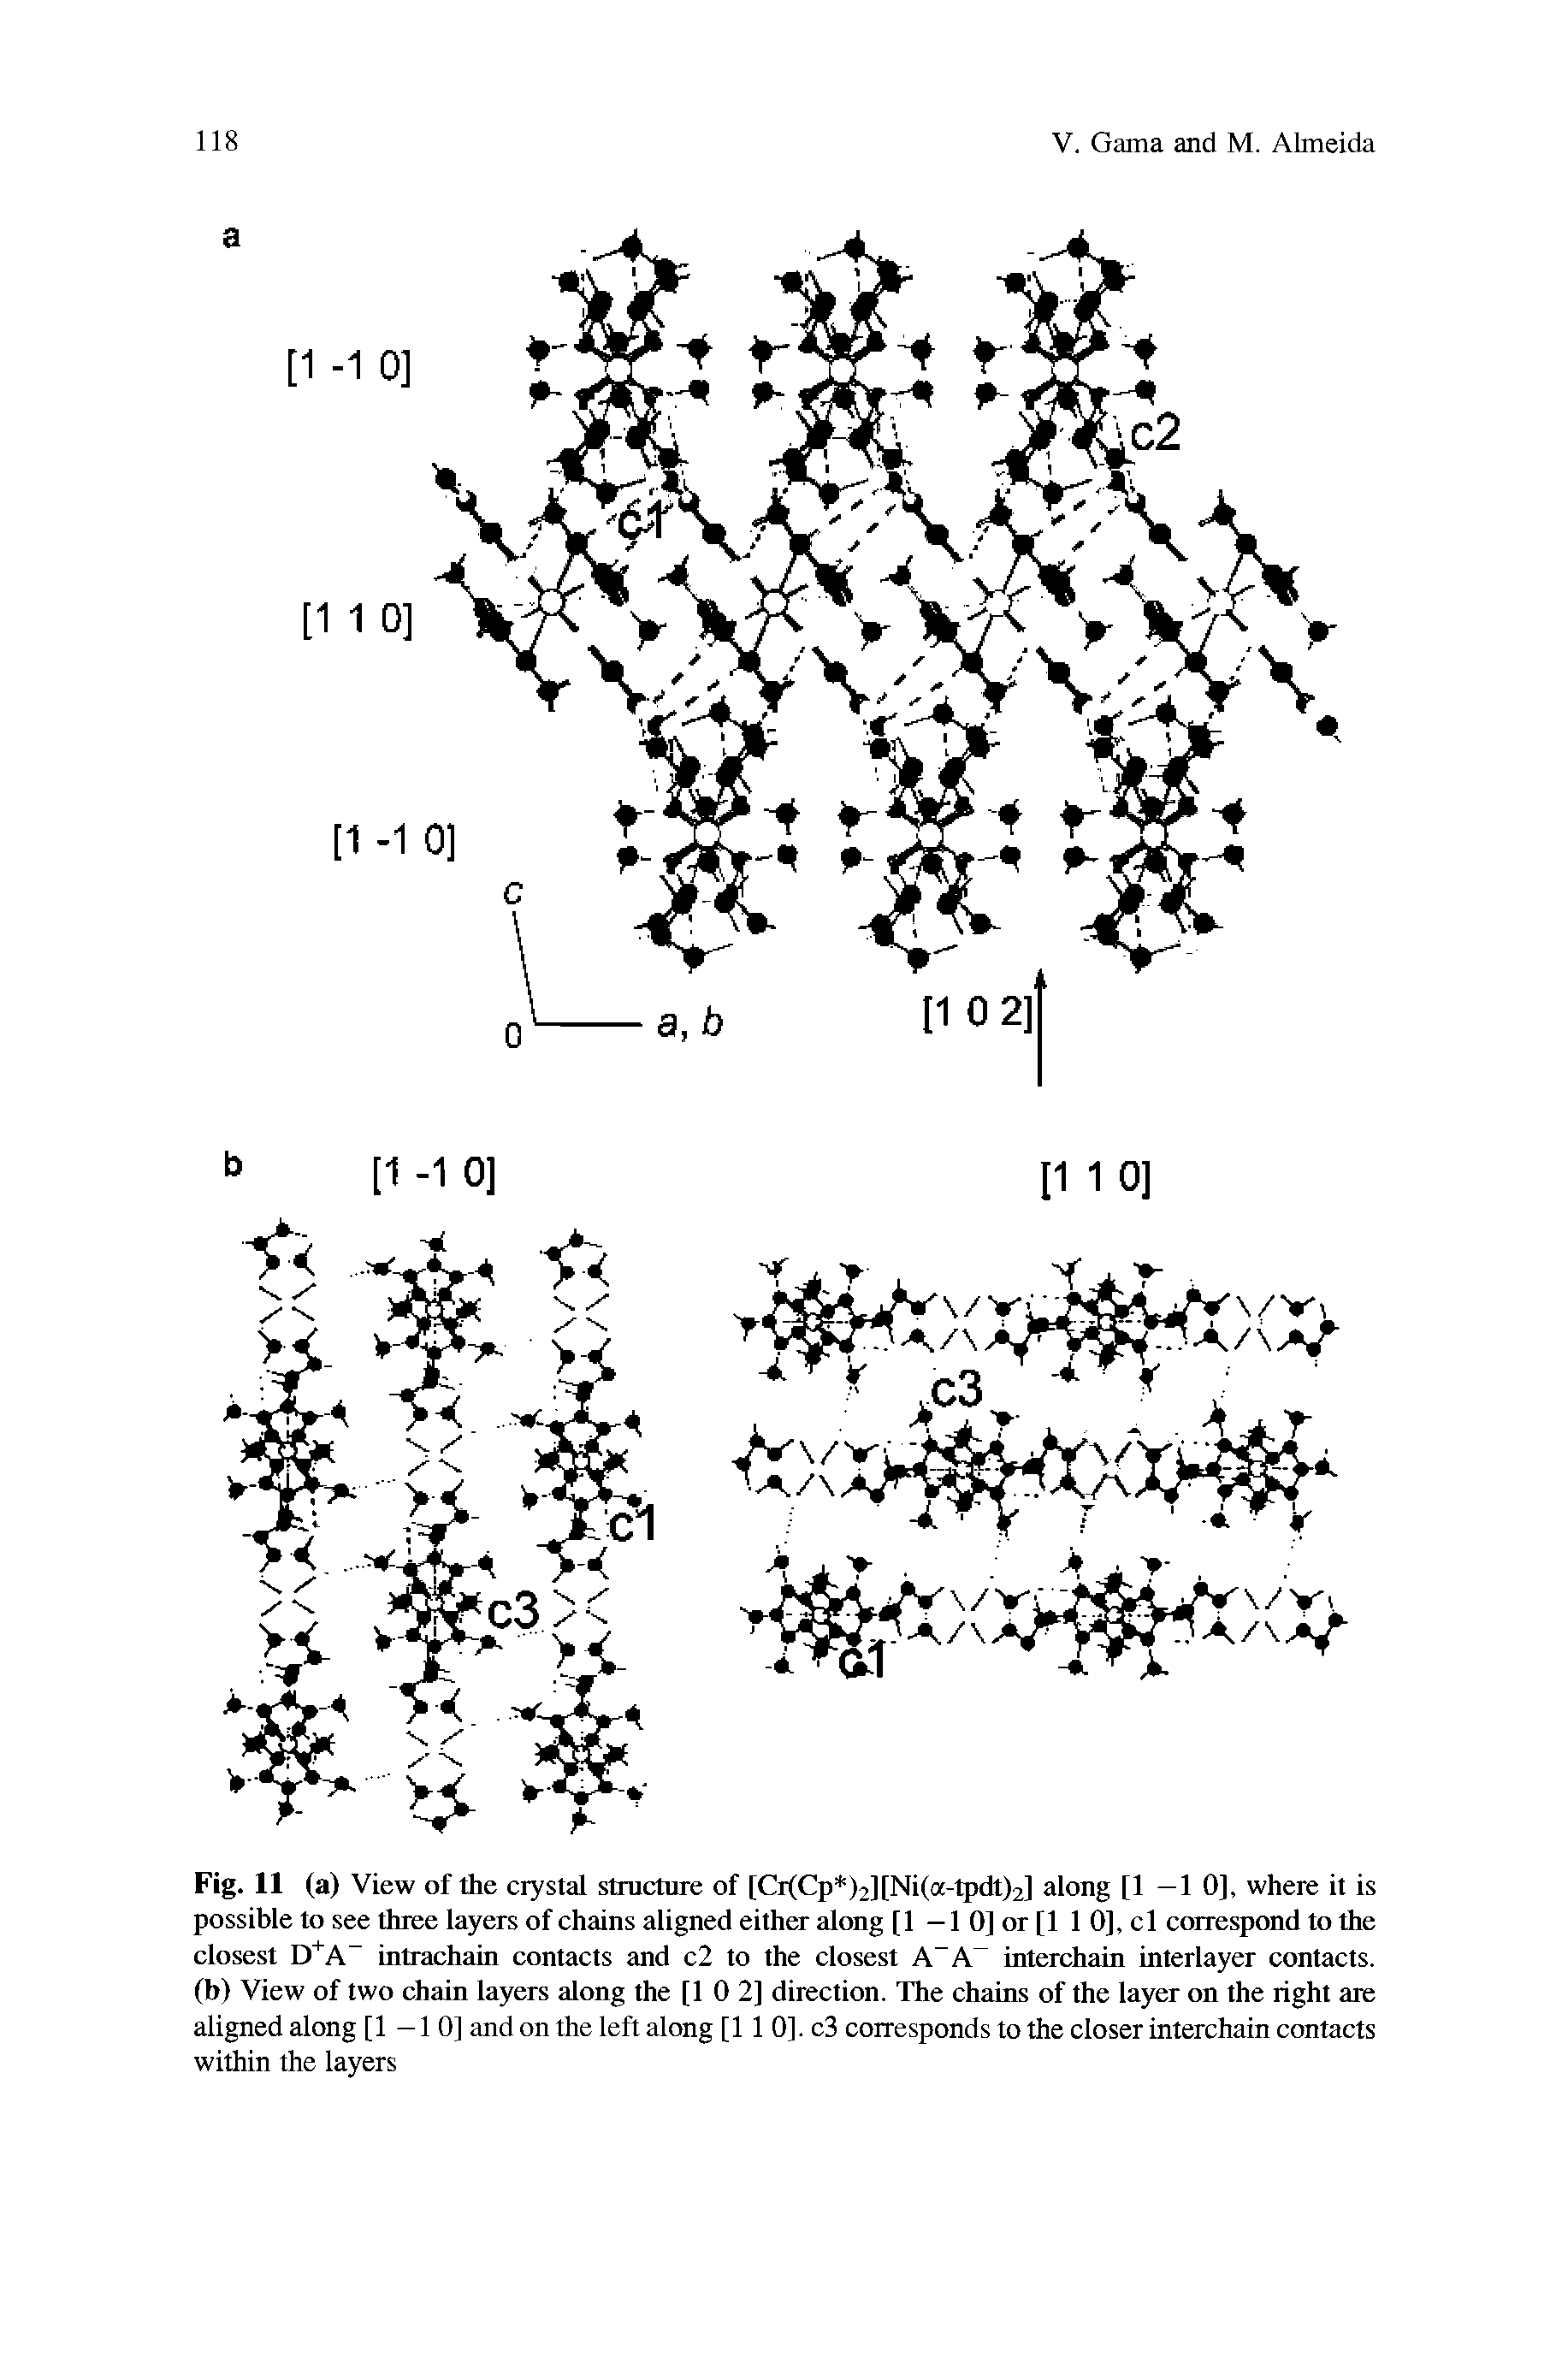 Fig. II (a) View of the crystal structure of [Cr(Cp )2][Ni(a-tpdt)2] along [1 —1 0], where it is possible to see three layers of chains aligned either along [1 —1 0] or [1 1 0], cl correspond to the closest D+A intrachain contacts and c2 to the closest A A interchain interlayer contacts, (b) View of two chain layers along the [1 0 2] direction. The chains of the layer on the right are aligned along [1 — 1 0] and on the left along [1 1 0]. c3 corresponds to the closer interchain contacts within the layers...